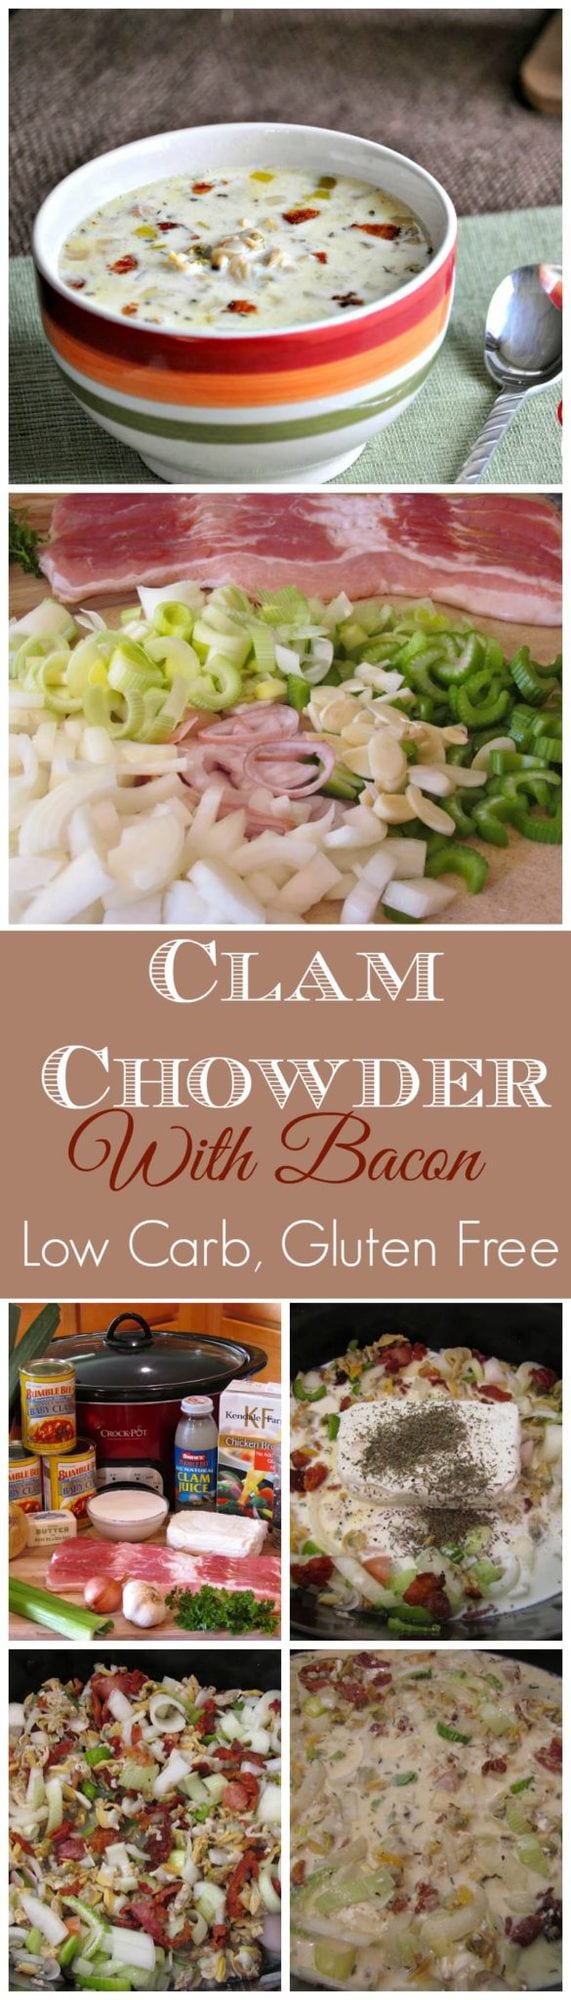 Slow Cooker Clam Chowder with Bacon - Low Carb, Gluten Free | Peace Love and Low Carb